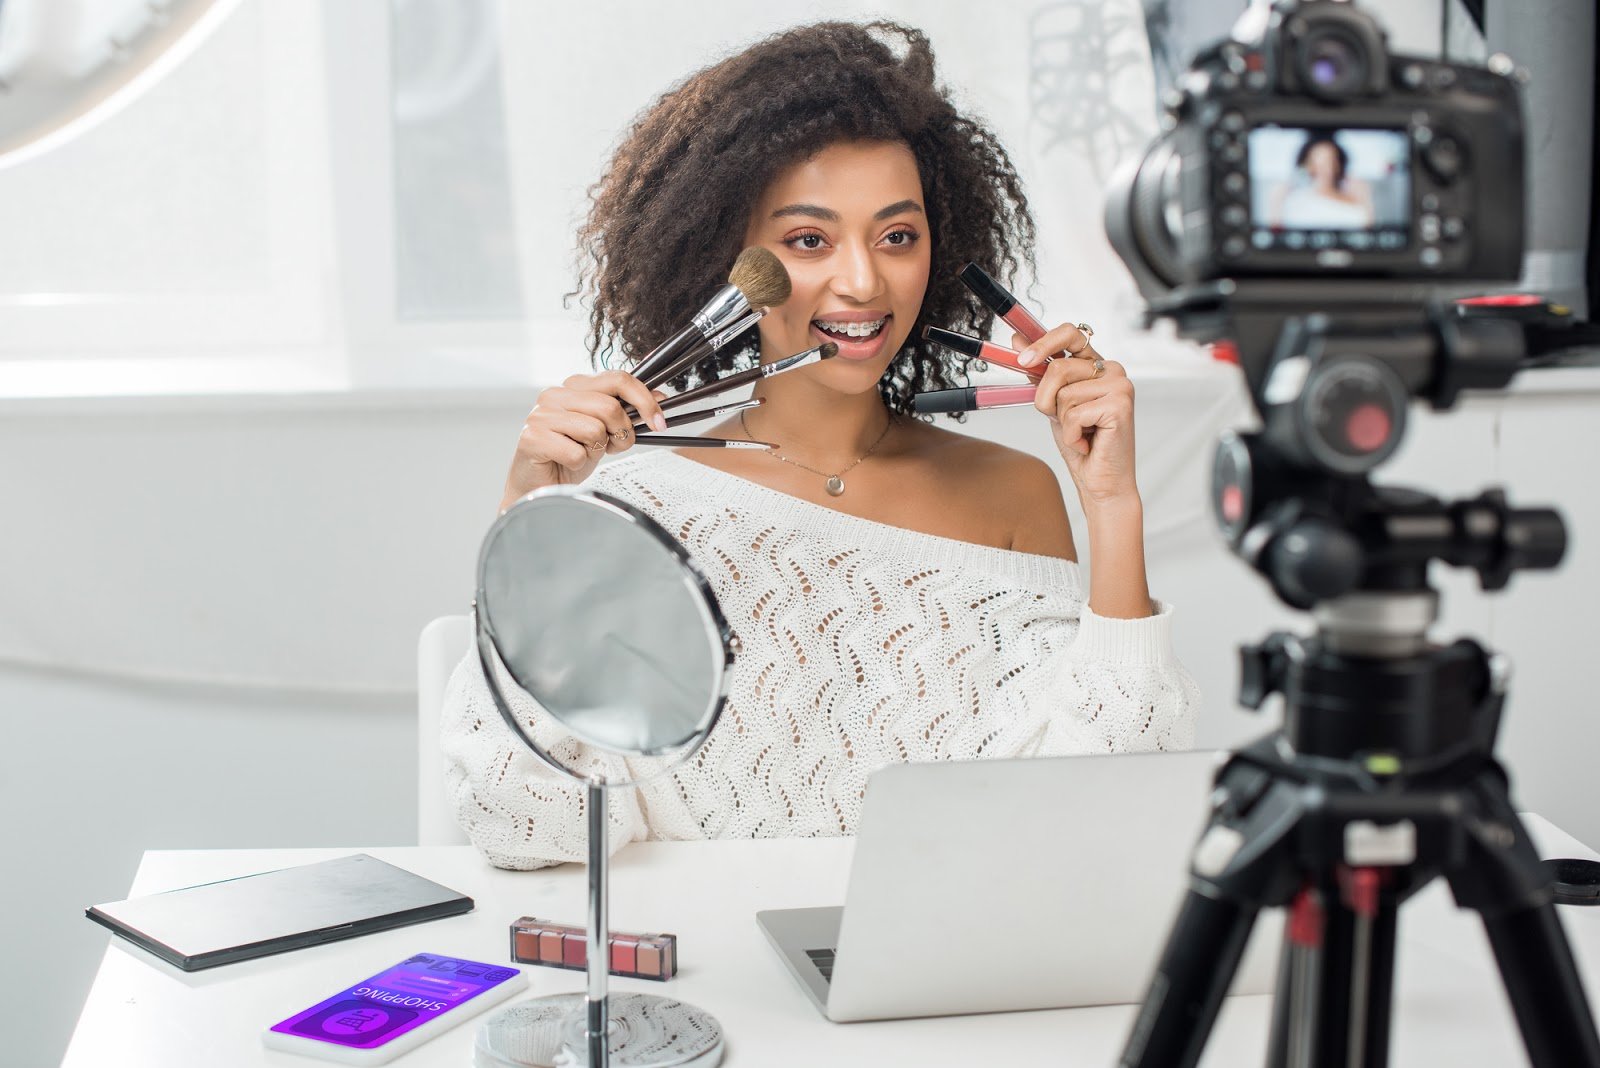 Have Beauty Influencers Changed How Companies Market To You?